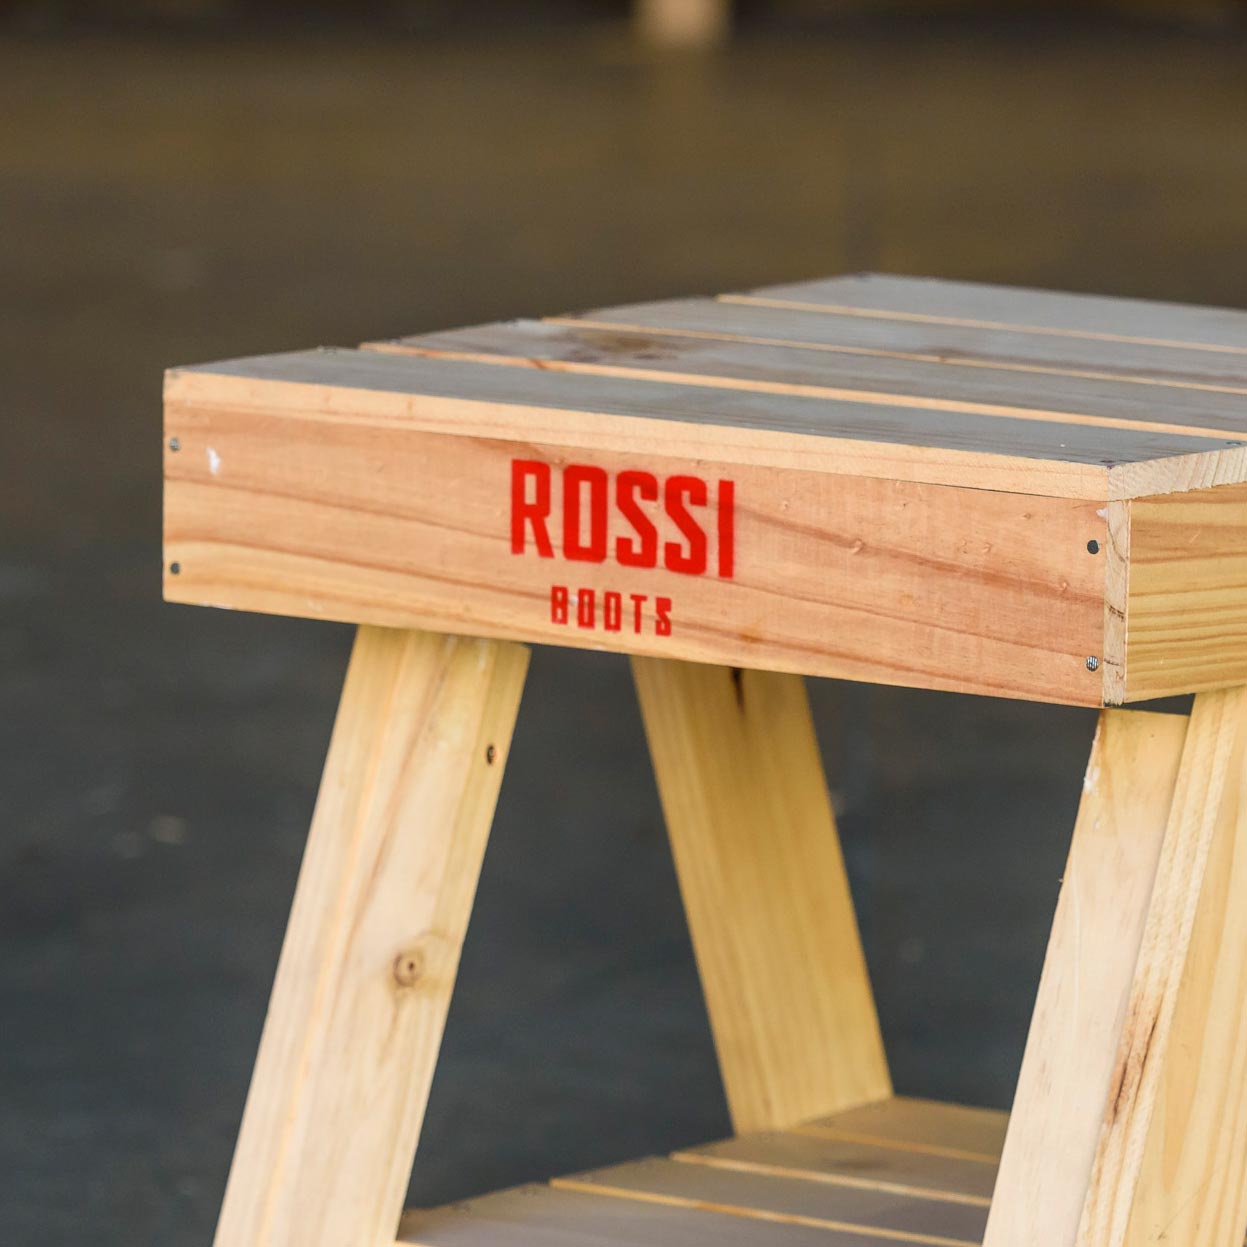 Wooden stool with custom Rossi Boots stamp, close-up